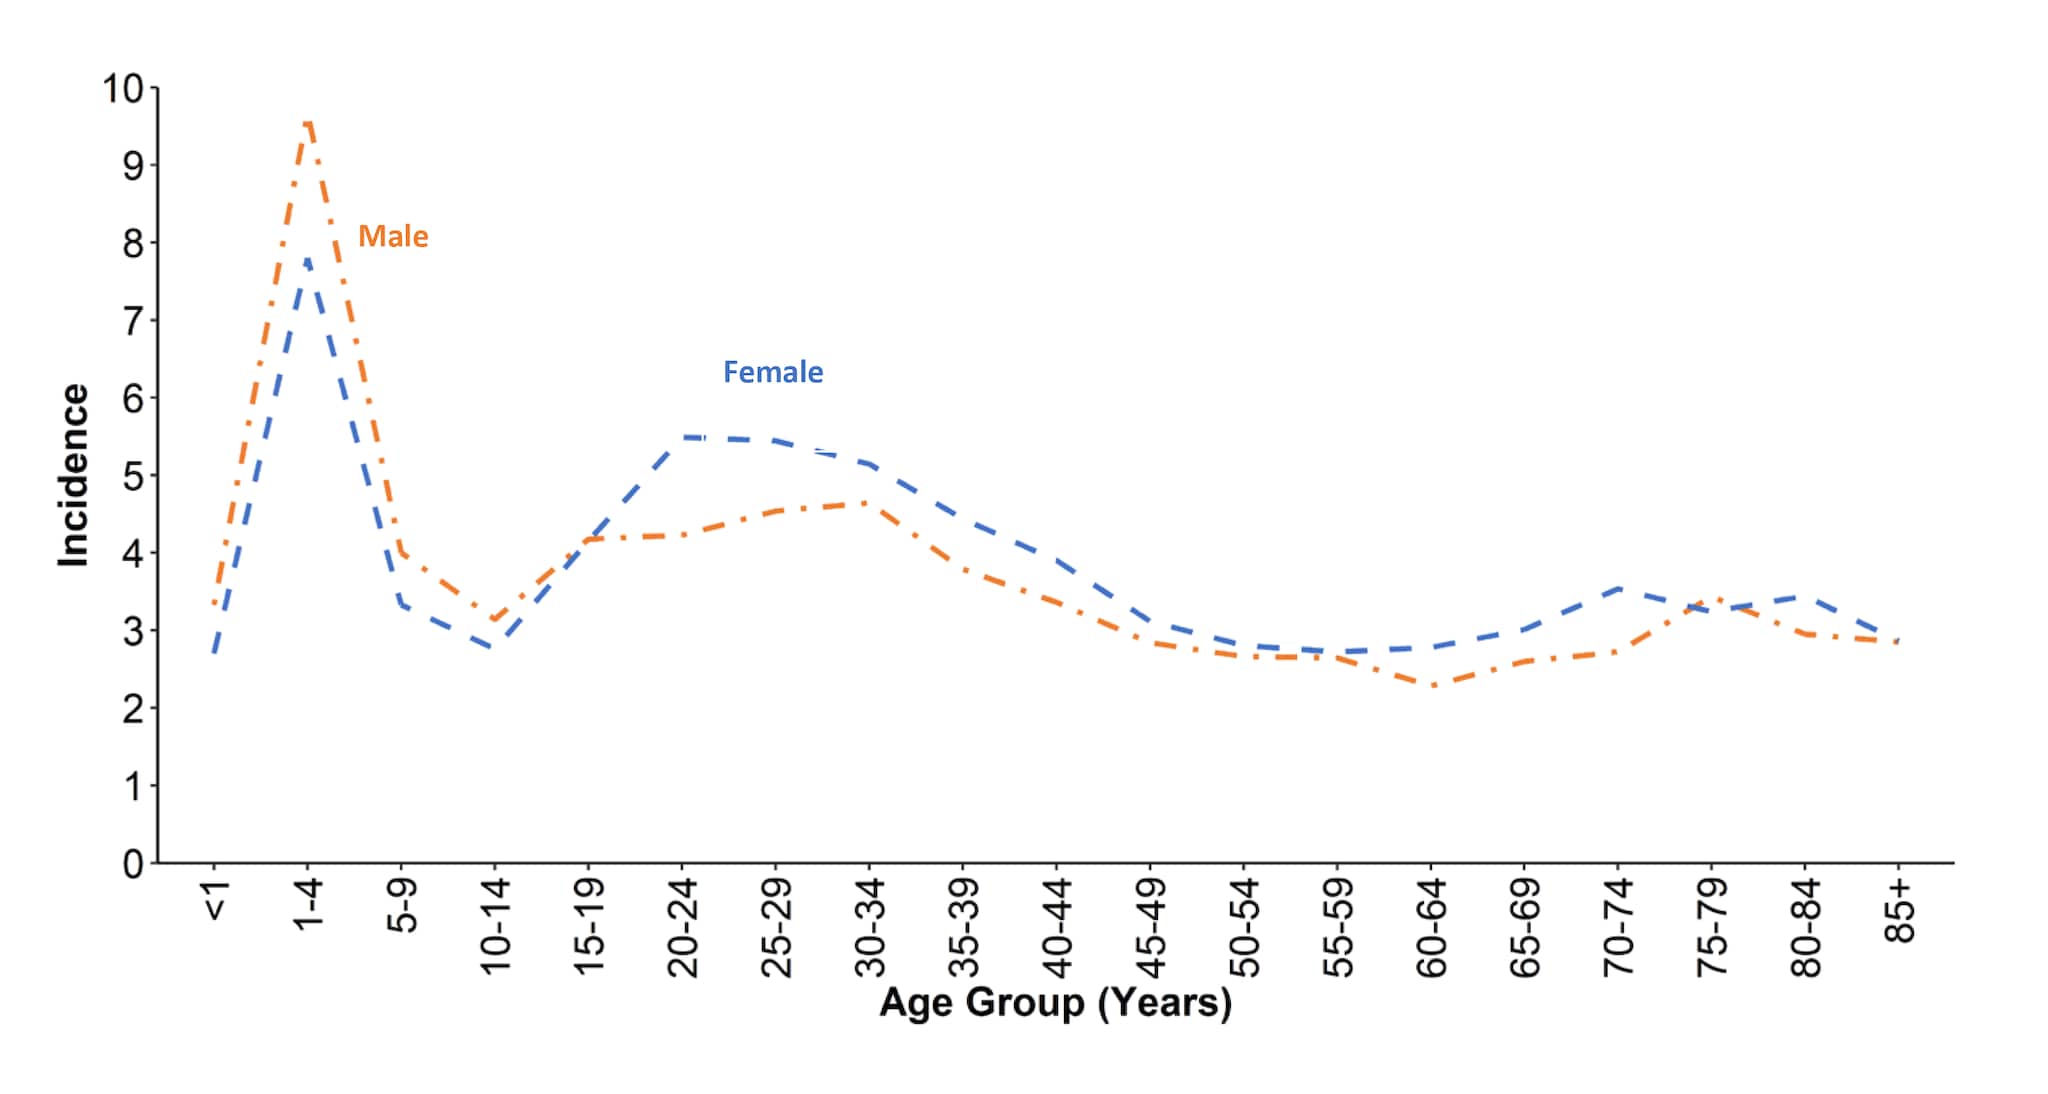 Figure 3. Incidence* of cryptosporidiosis cases, by age group